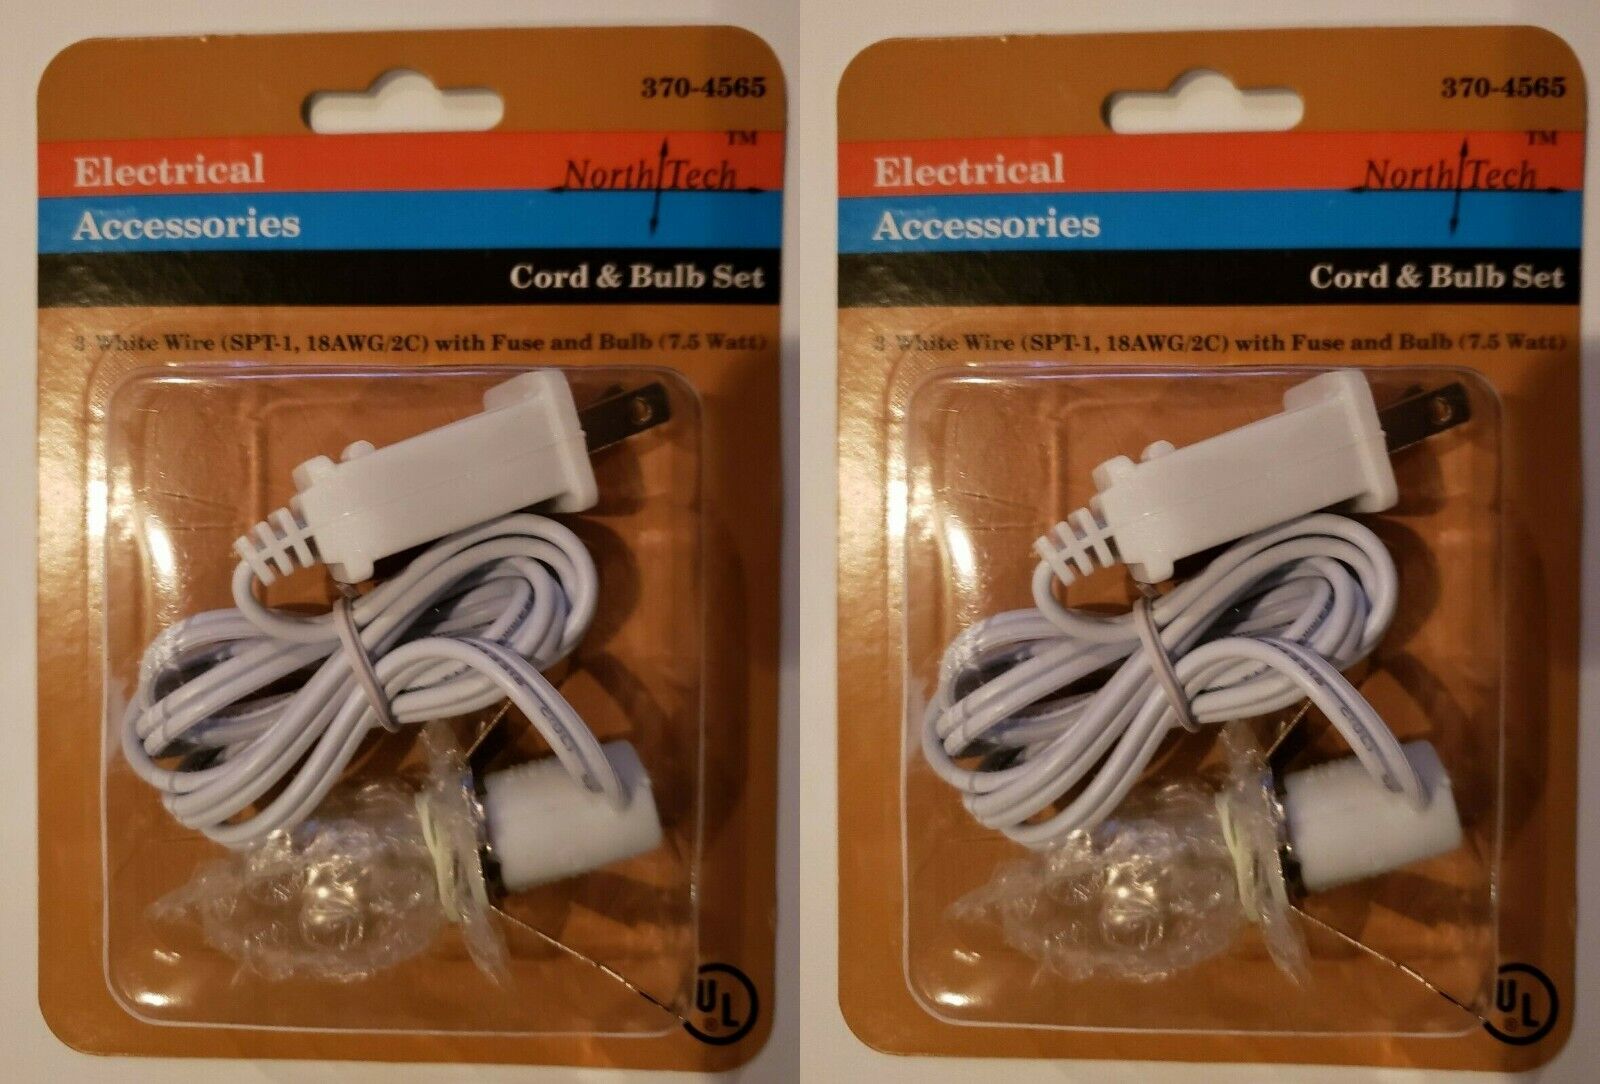 2 New C7 Replacement Light Cord for blow mold, 3\', Socket & Bulb with clips